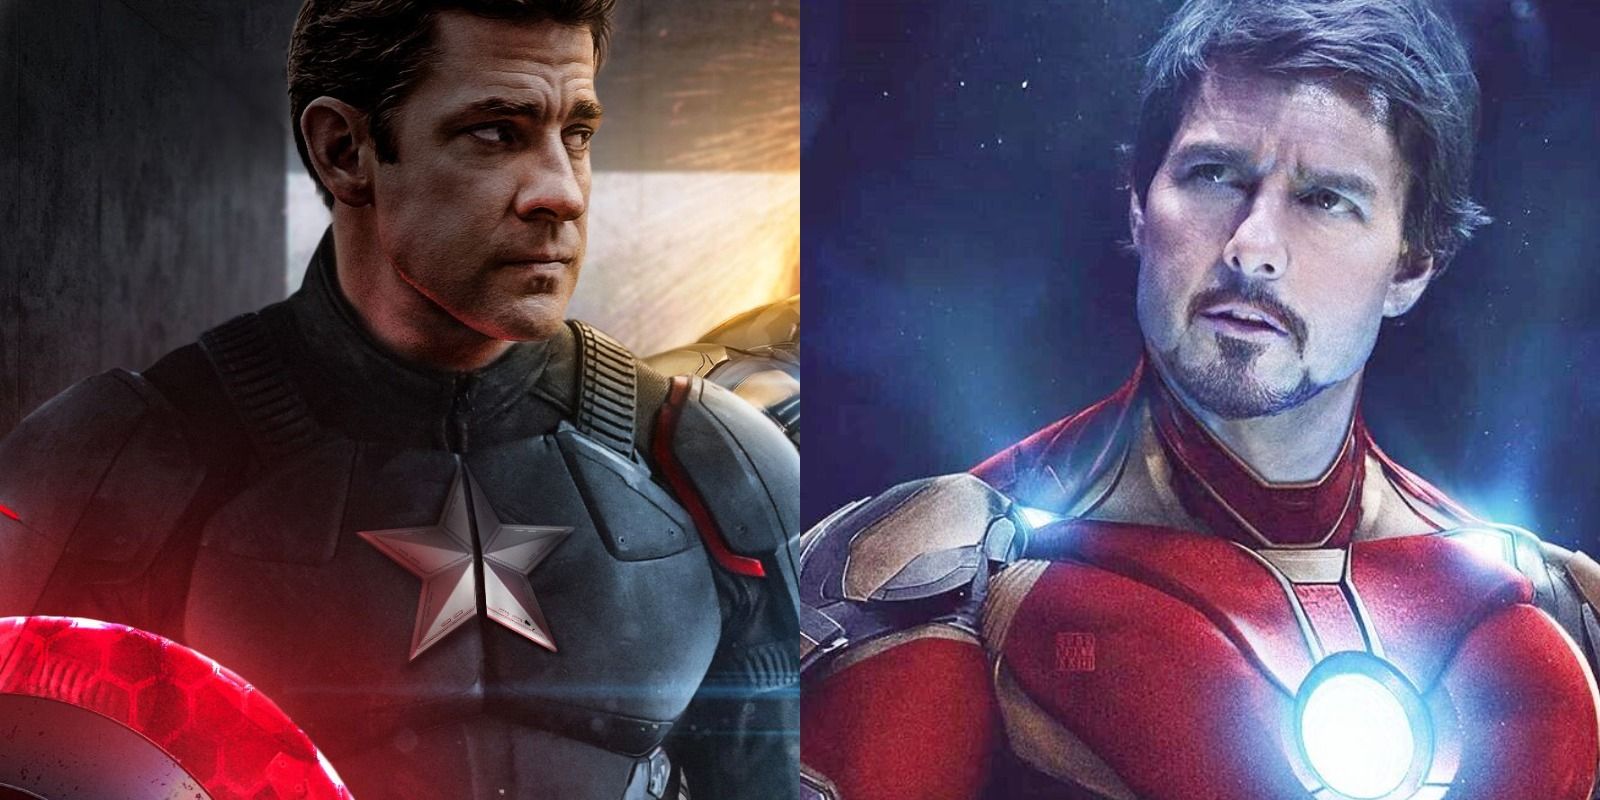 Side by side images of John Krasinski as Captain America and Tom Cruise as Iron Man